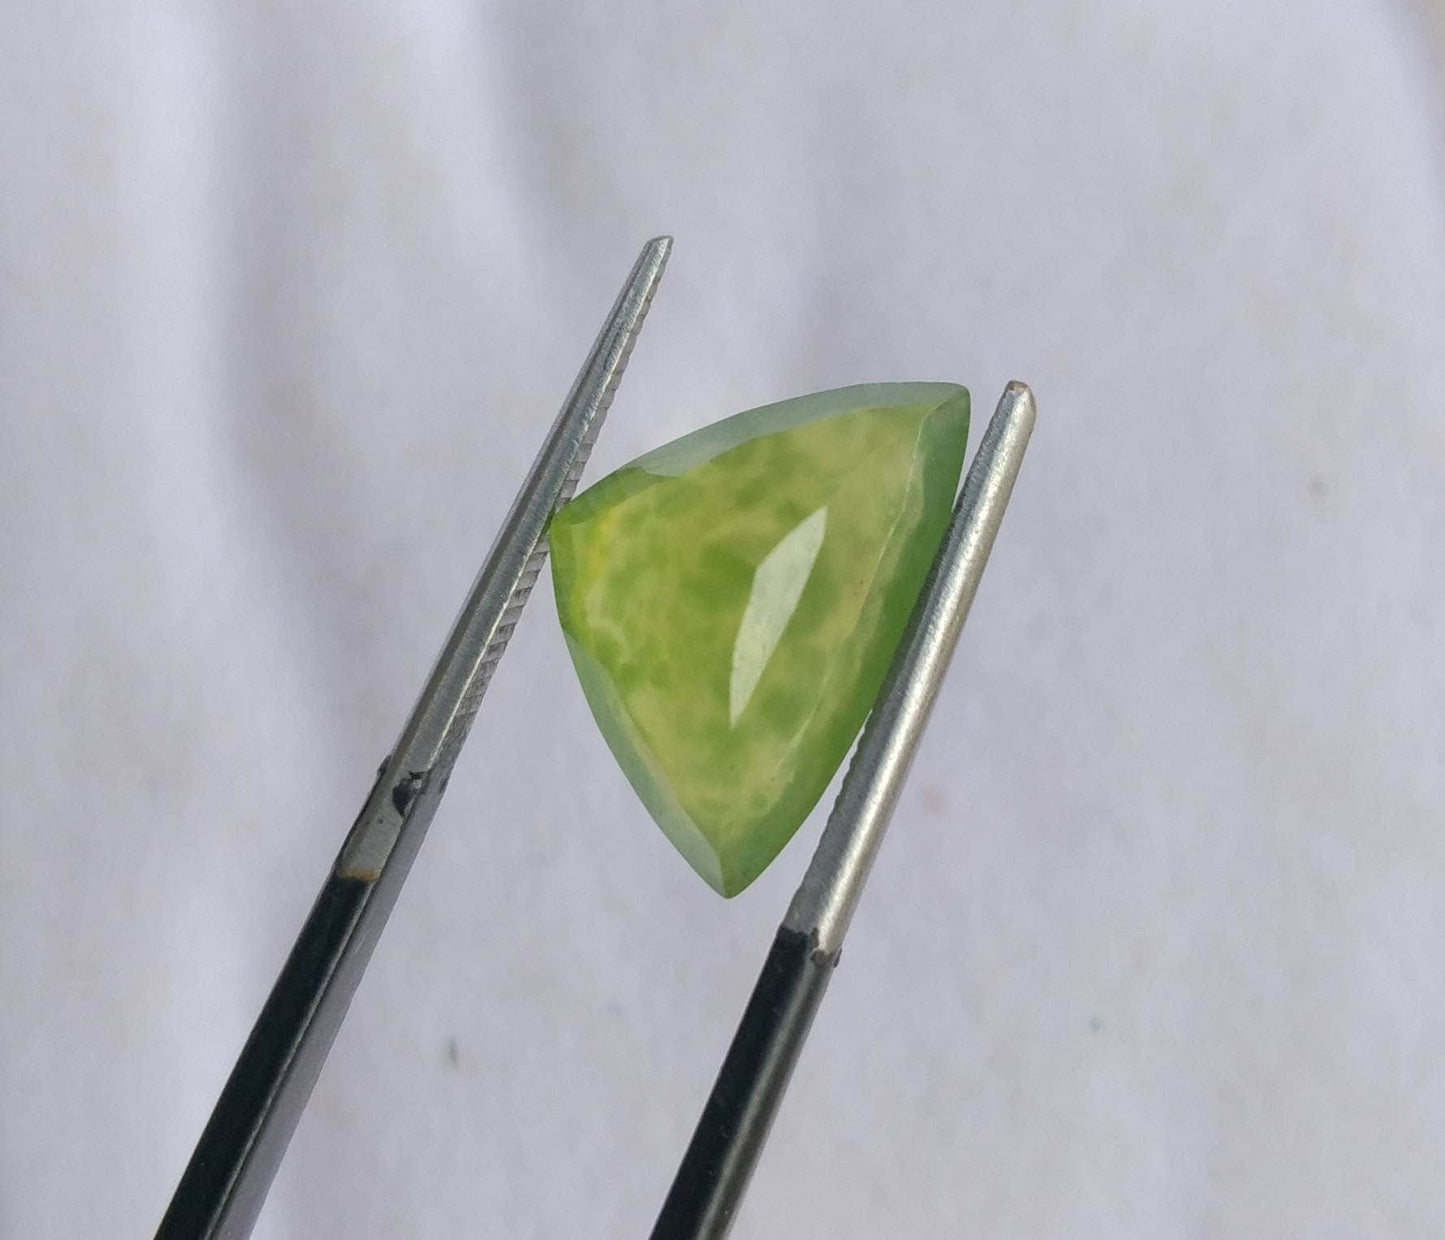 ARSAA GEMS AND MINERALSNatural fine quality beautiful 5 carats triangle cut shape faceted green hydrograssular garnet gem - Premium  from ARSAA GEMS AND MINERALS - Just $10.00! Shop now at ARSAA GEMS AND MINERALS